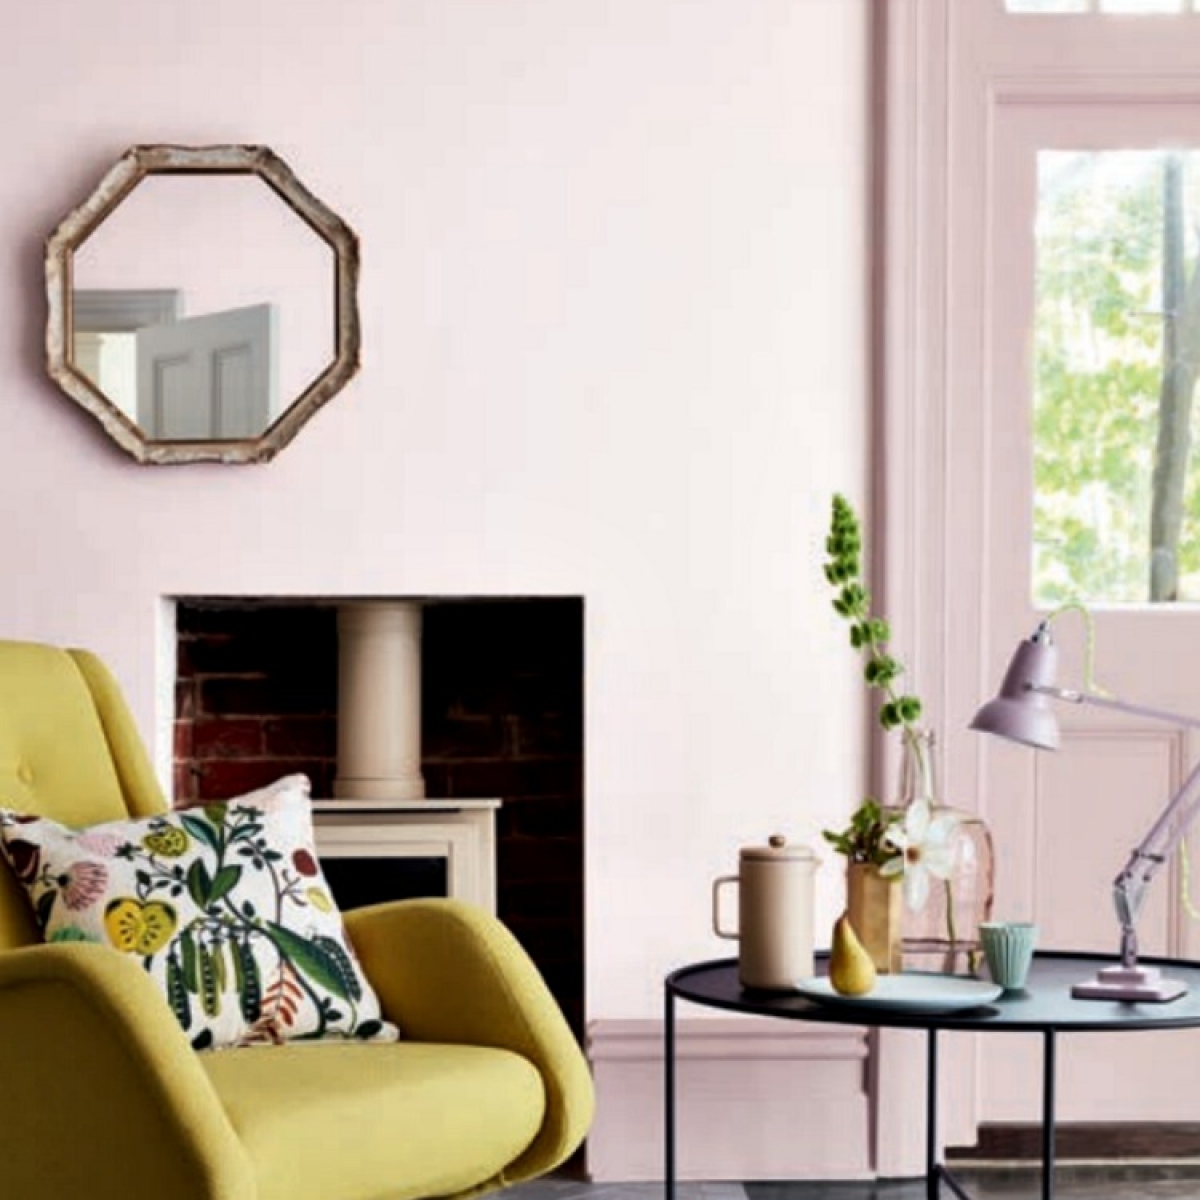 pale pink walls in livingroom is freshened up with lime yellow mid century modern chair. walls painted in Dorchester mid by Little Green paint